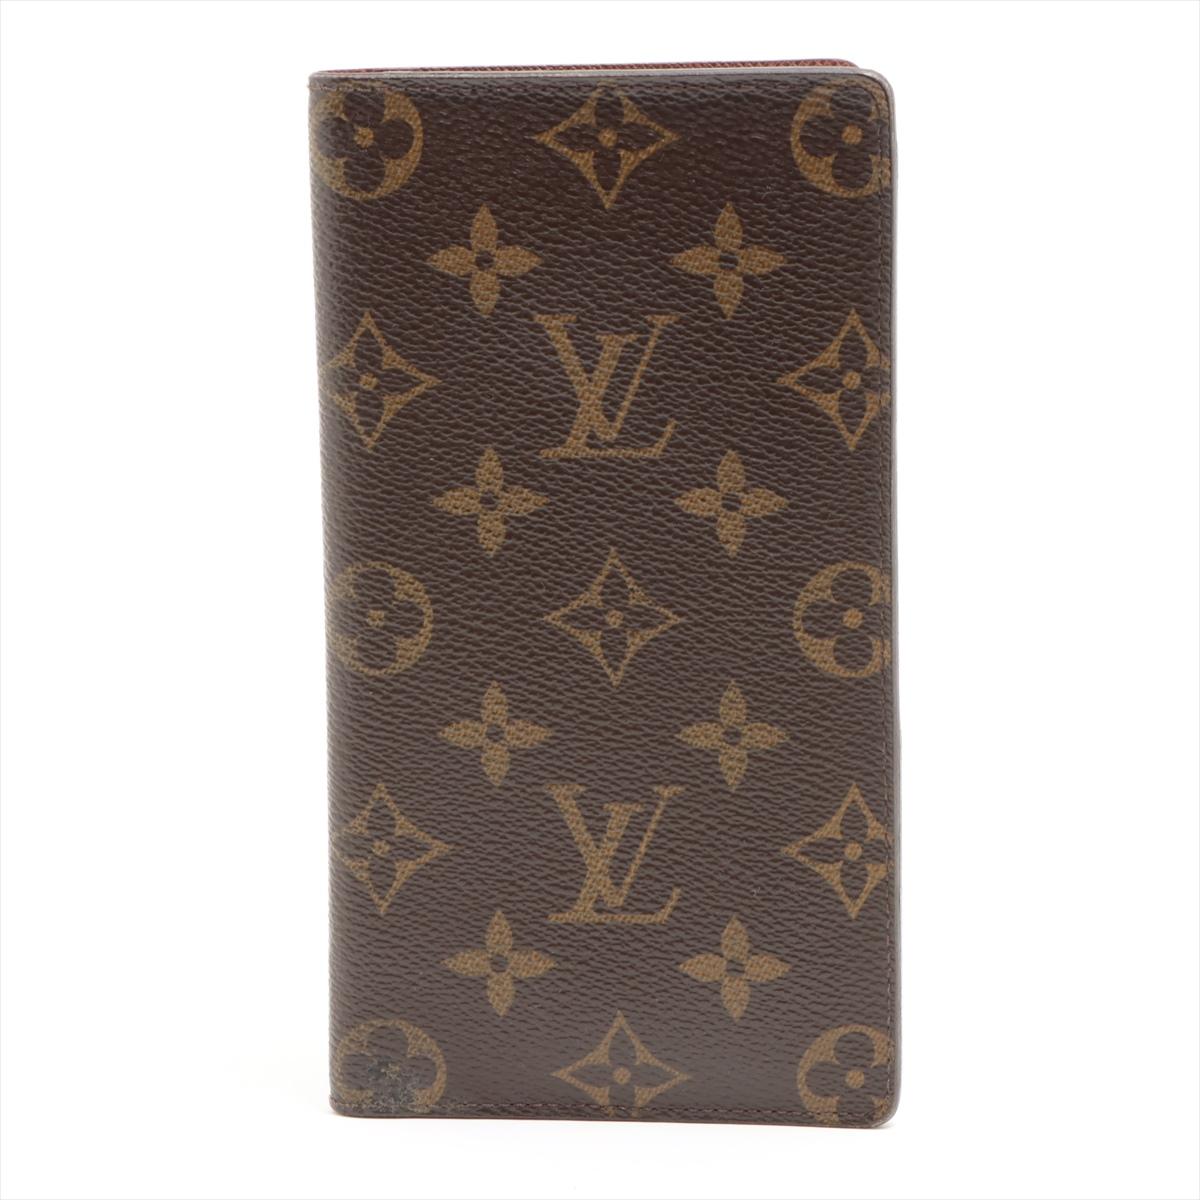 The Louis Vuitton Monogram Checkbook Long Wallet is a sophisticated and practical accessory that seamlessly blends iconic design with functionality. Crafted from the classic Monogram canvas, the wallet features the timeless LV pattern, reflecting